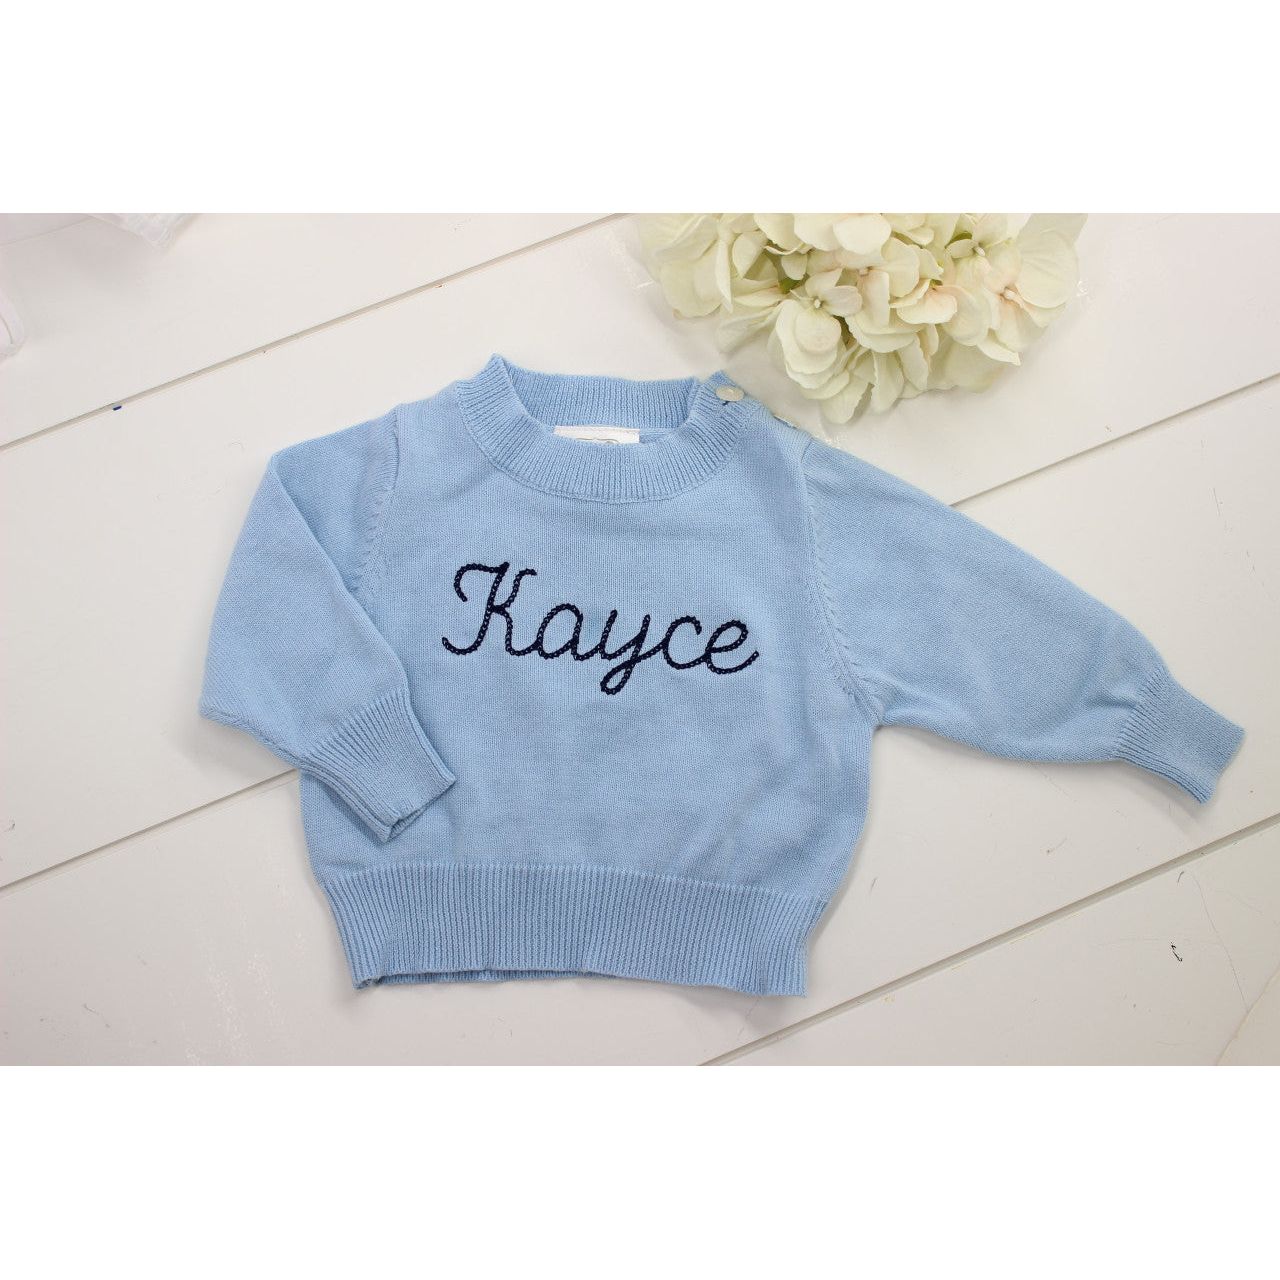 Baby Boys Monogram Sweater Light Blue Crewneck Knitted - Hiccups